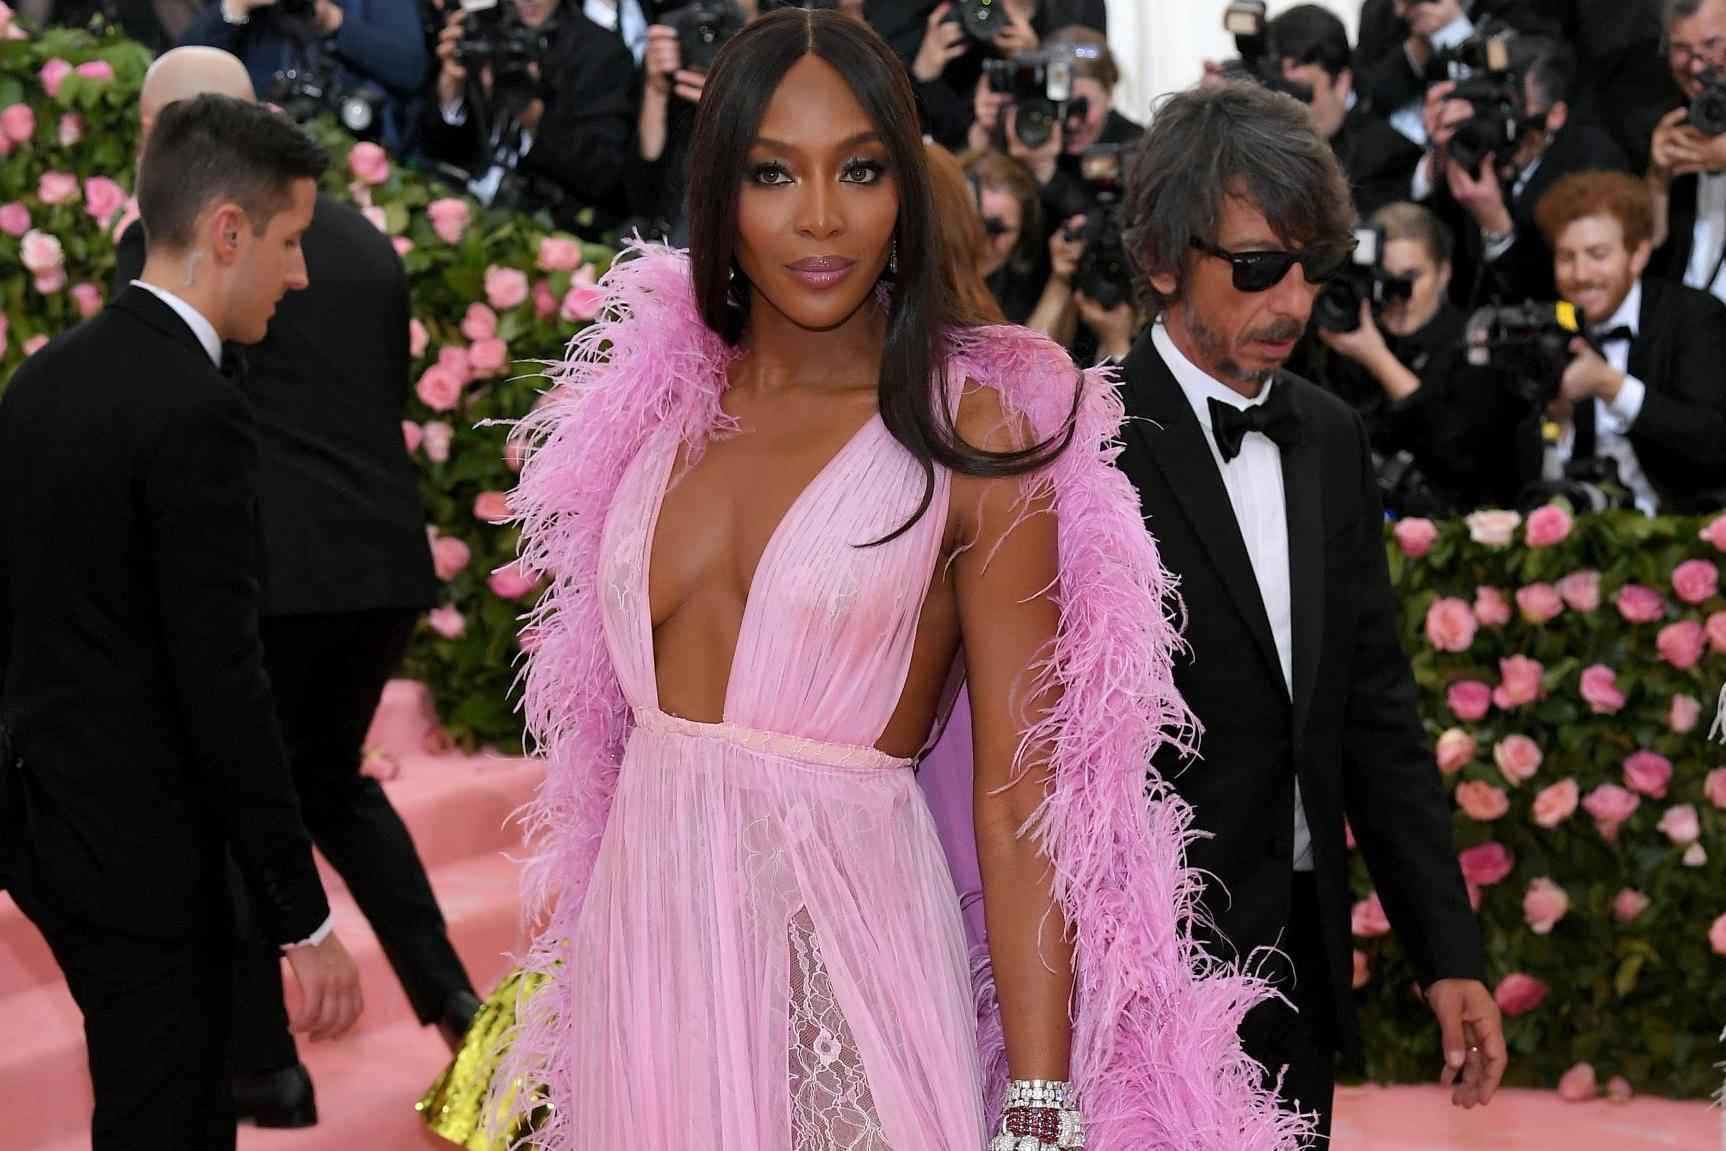 Naomi Campbell says she was denied entry to a hotel because of her race (Getty)